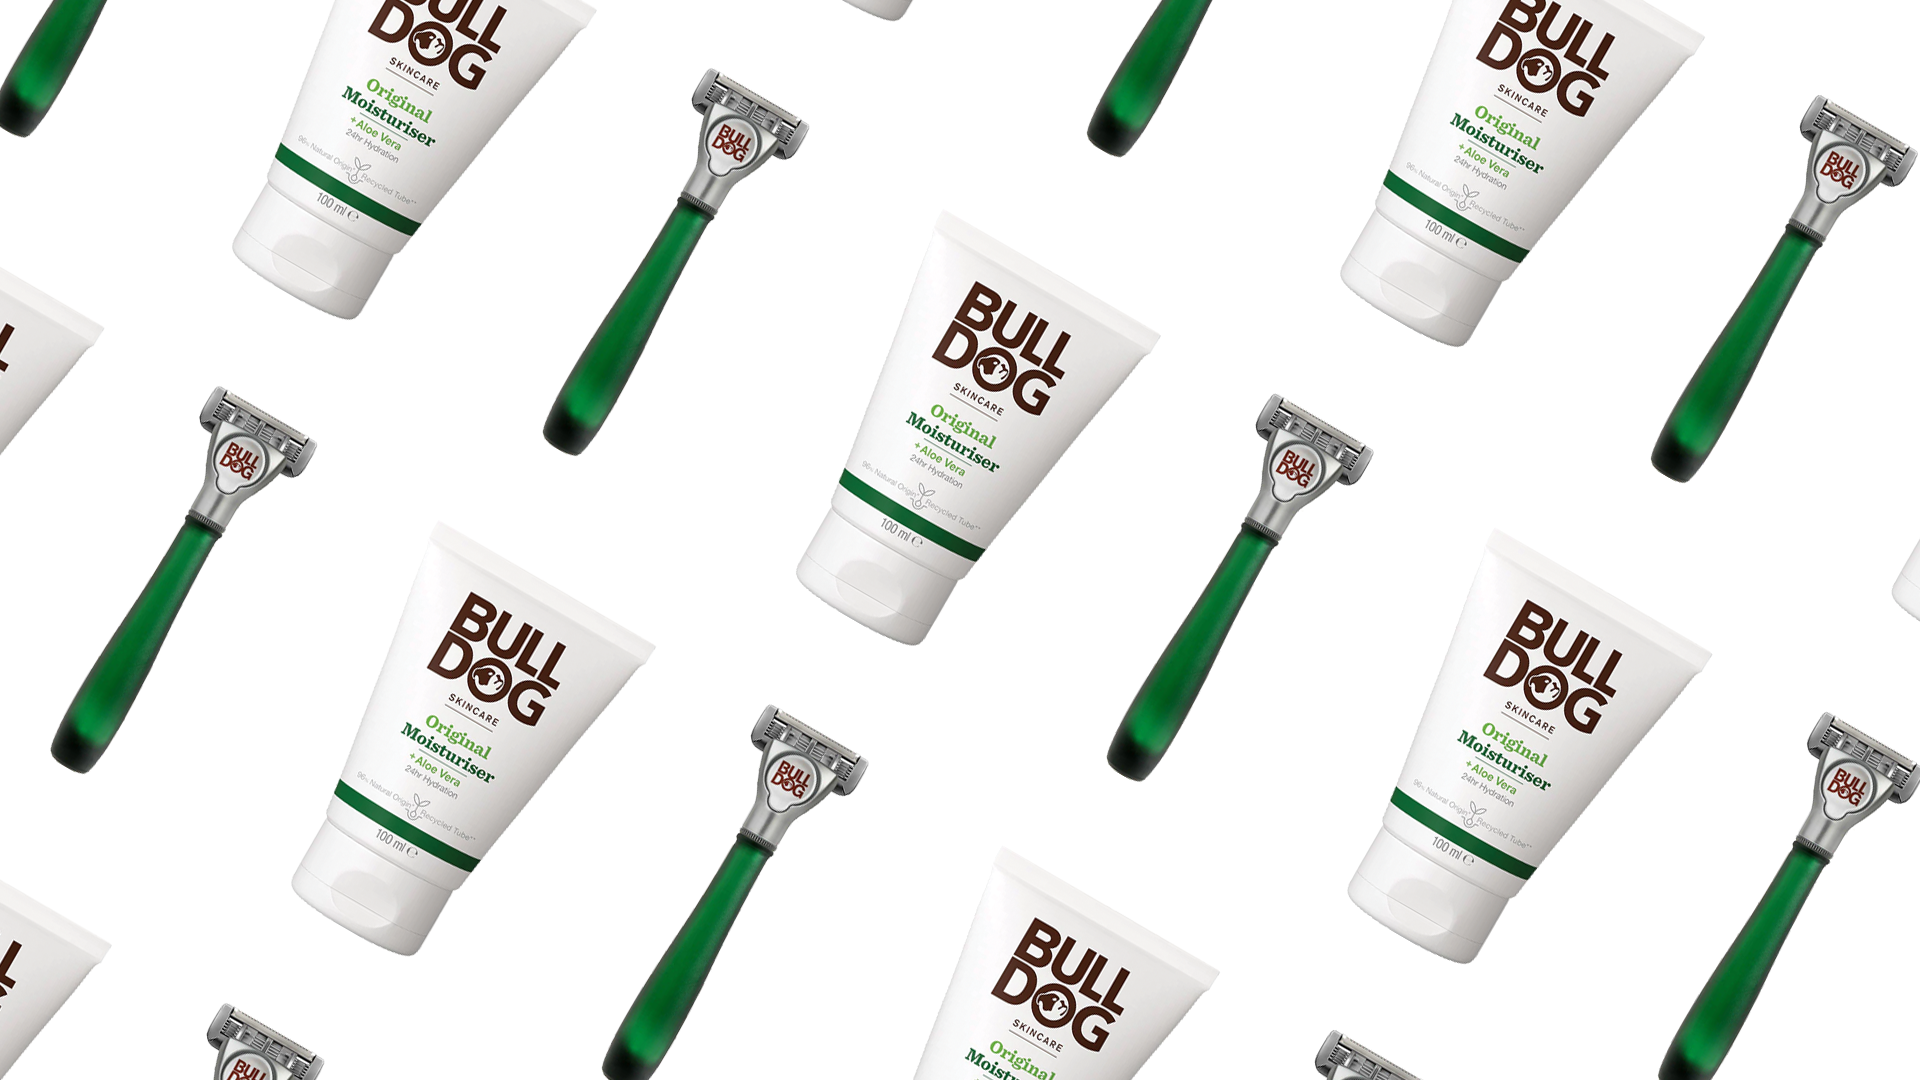 Up Your Skin & Grooming Game With Bulldog